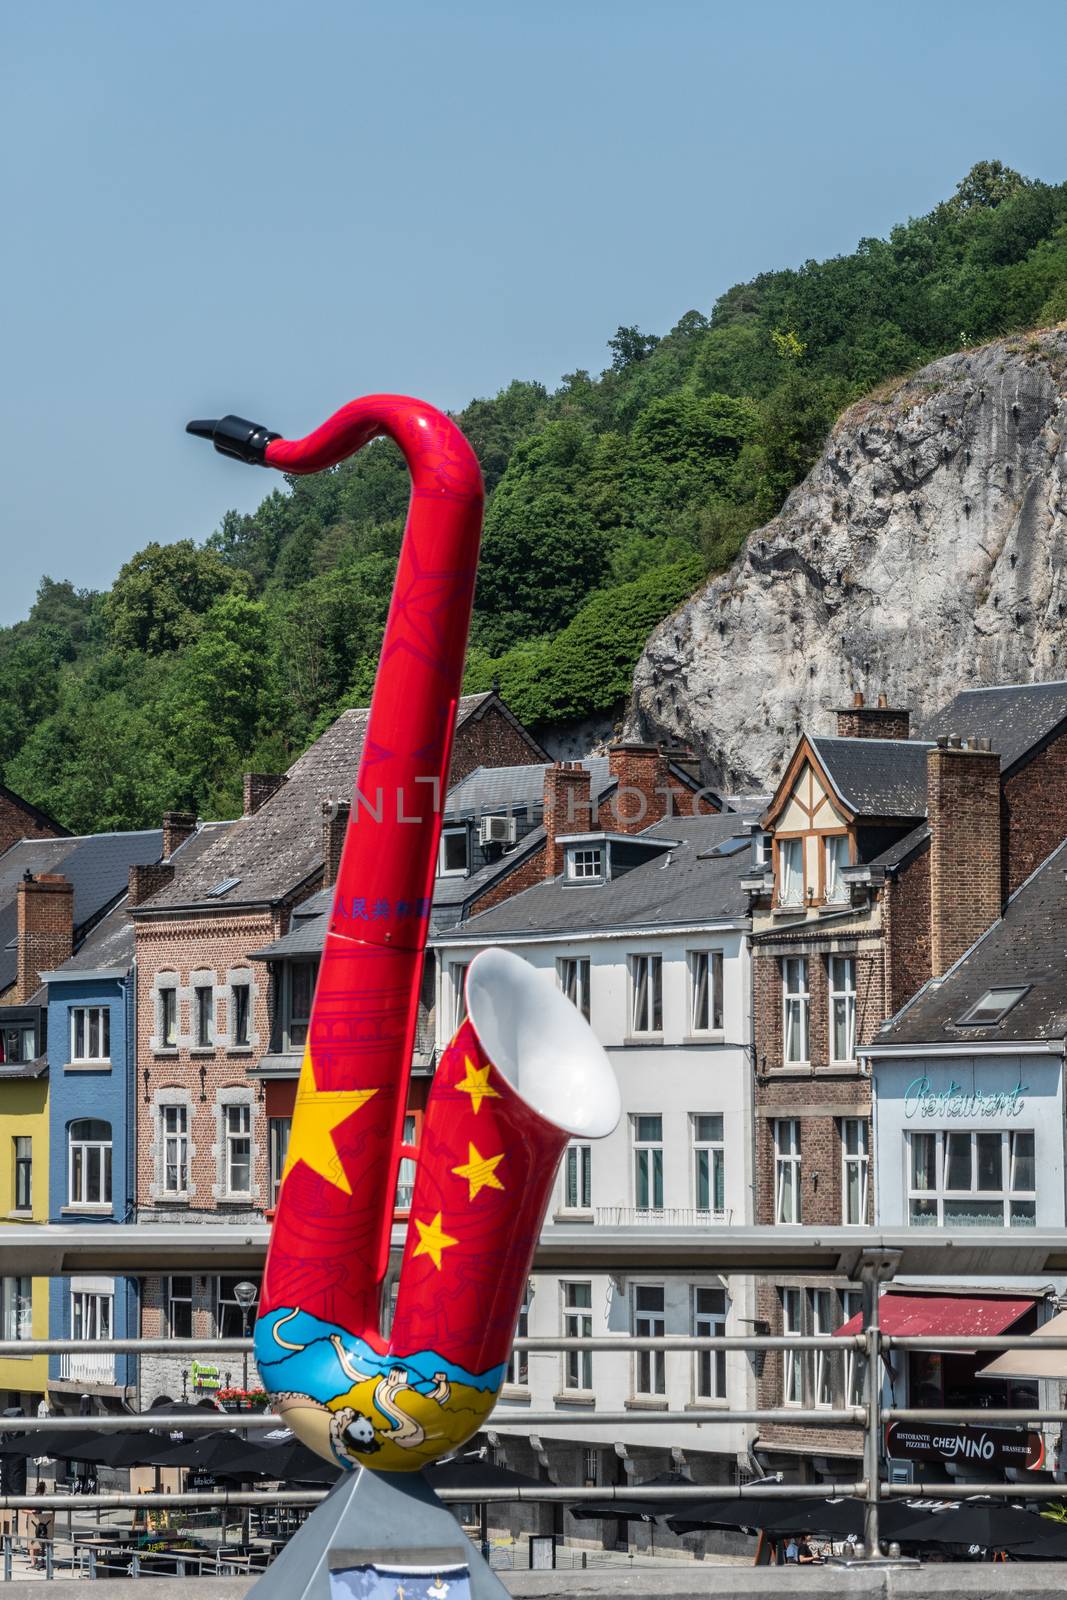 Dinant, Belgium - June 26, 2019: Red and Yellow saxophone statue to honor China on Charles de Gaulle bridge. Business and houses in back under green foliage and blue sky.